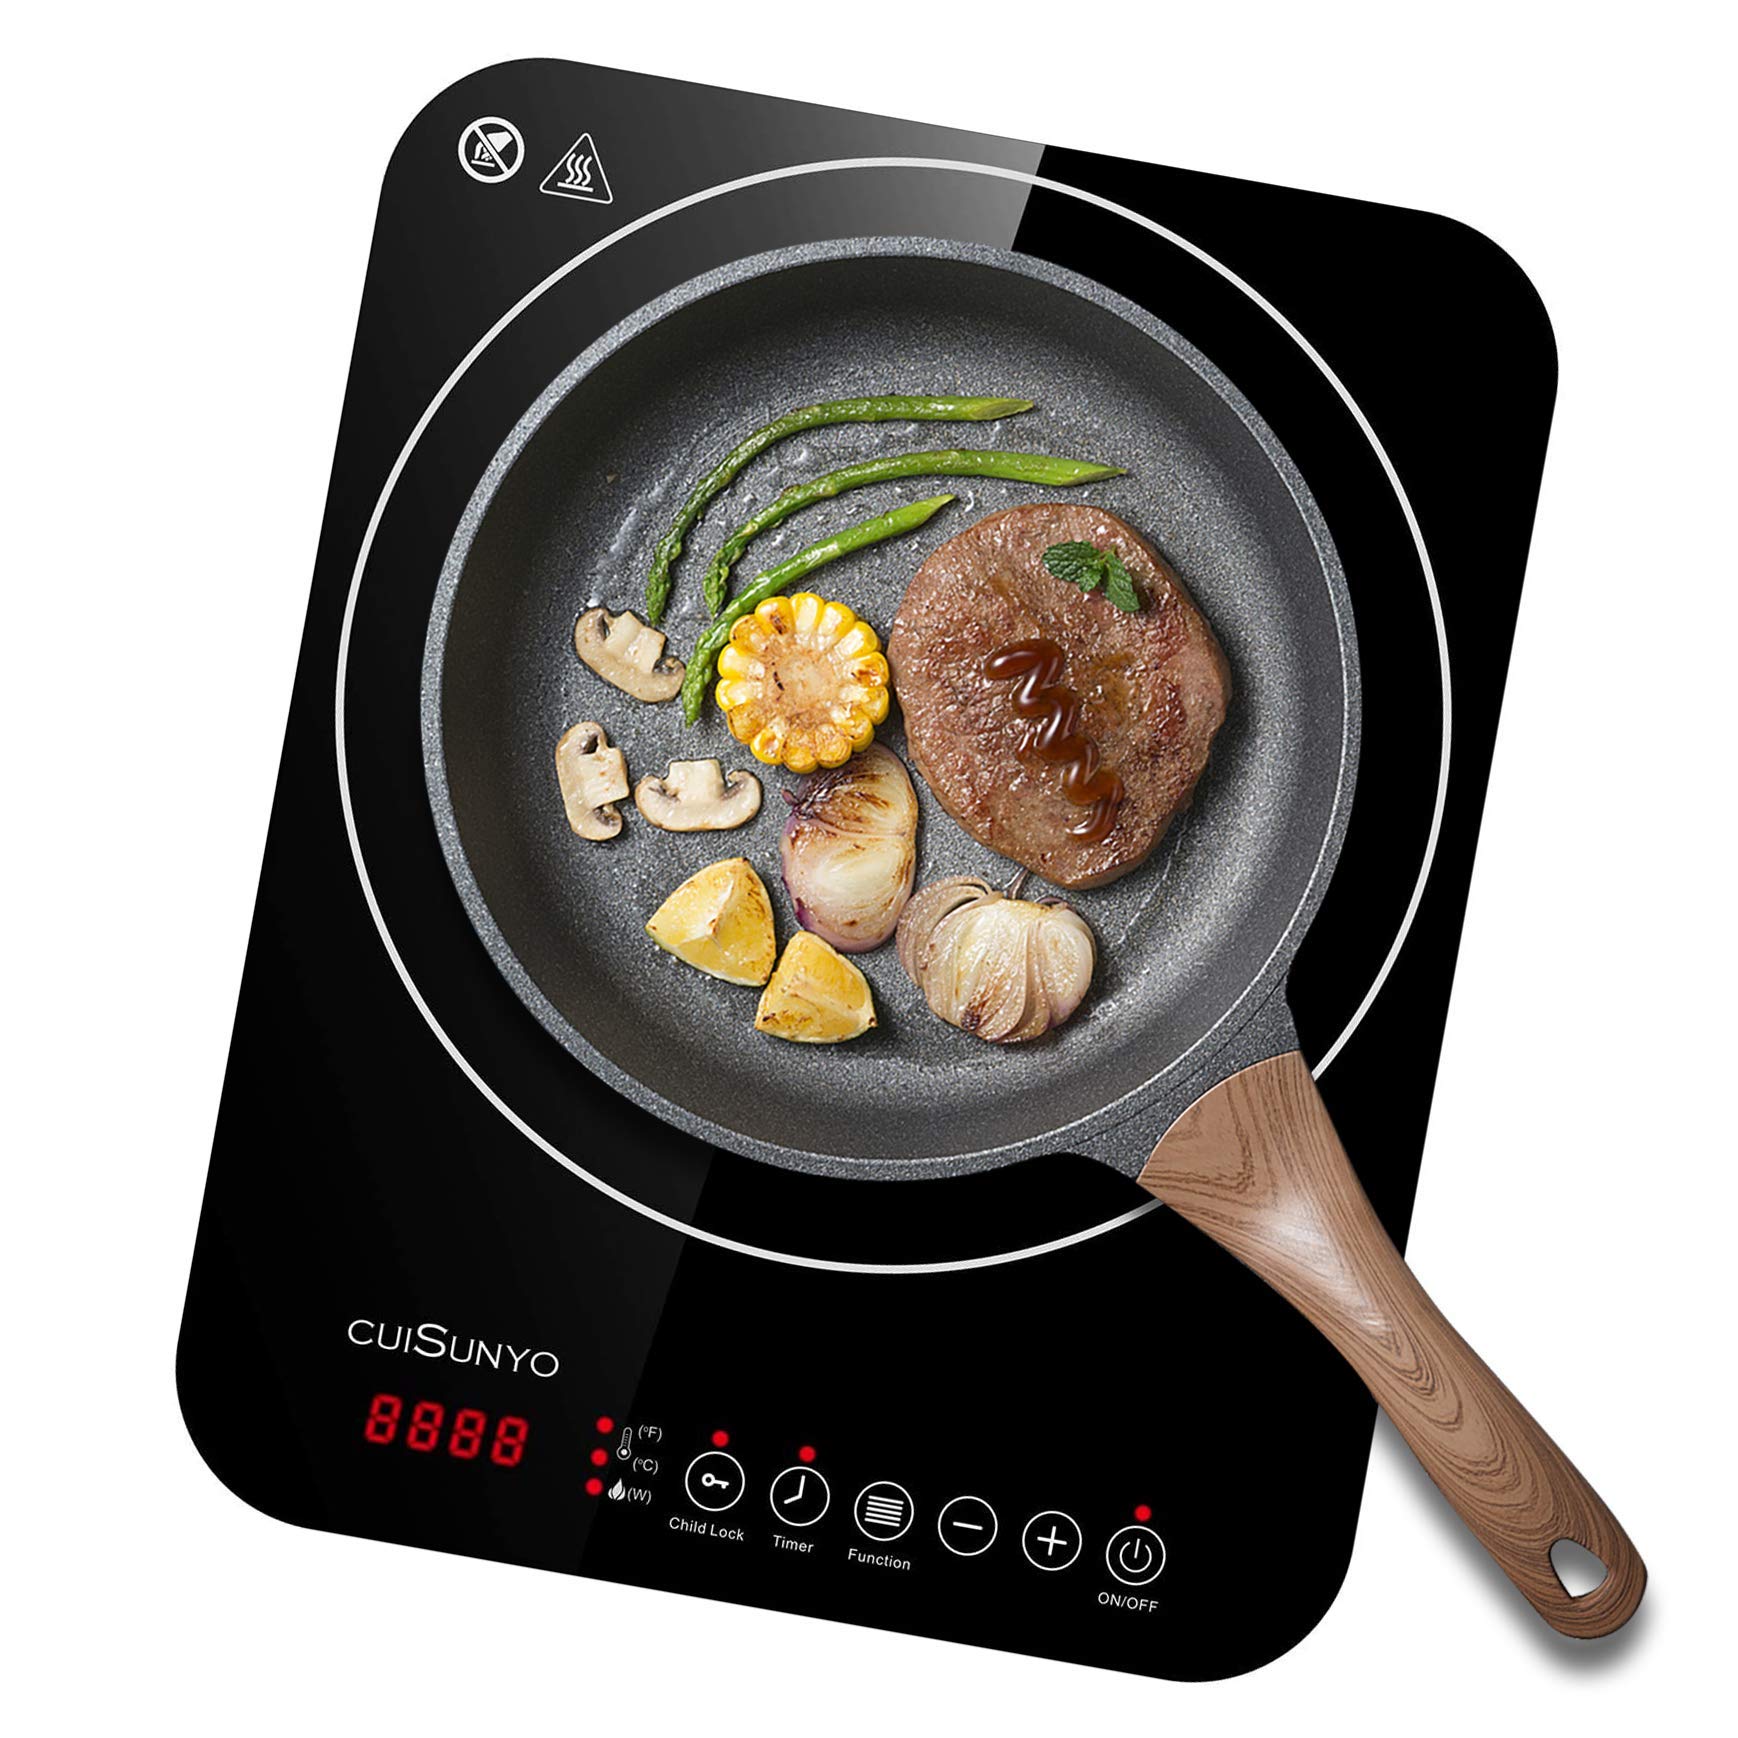 CUISUNYO Portable Induction Cooktop 1800W Electric Stovetop Burner Top 